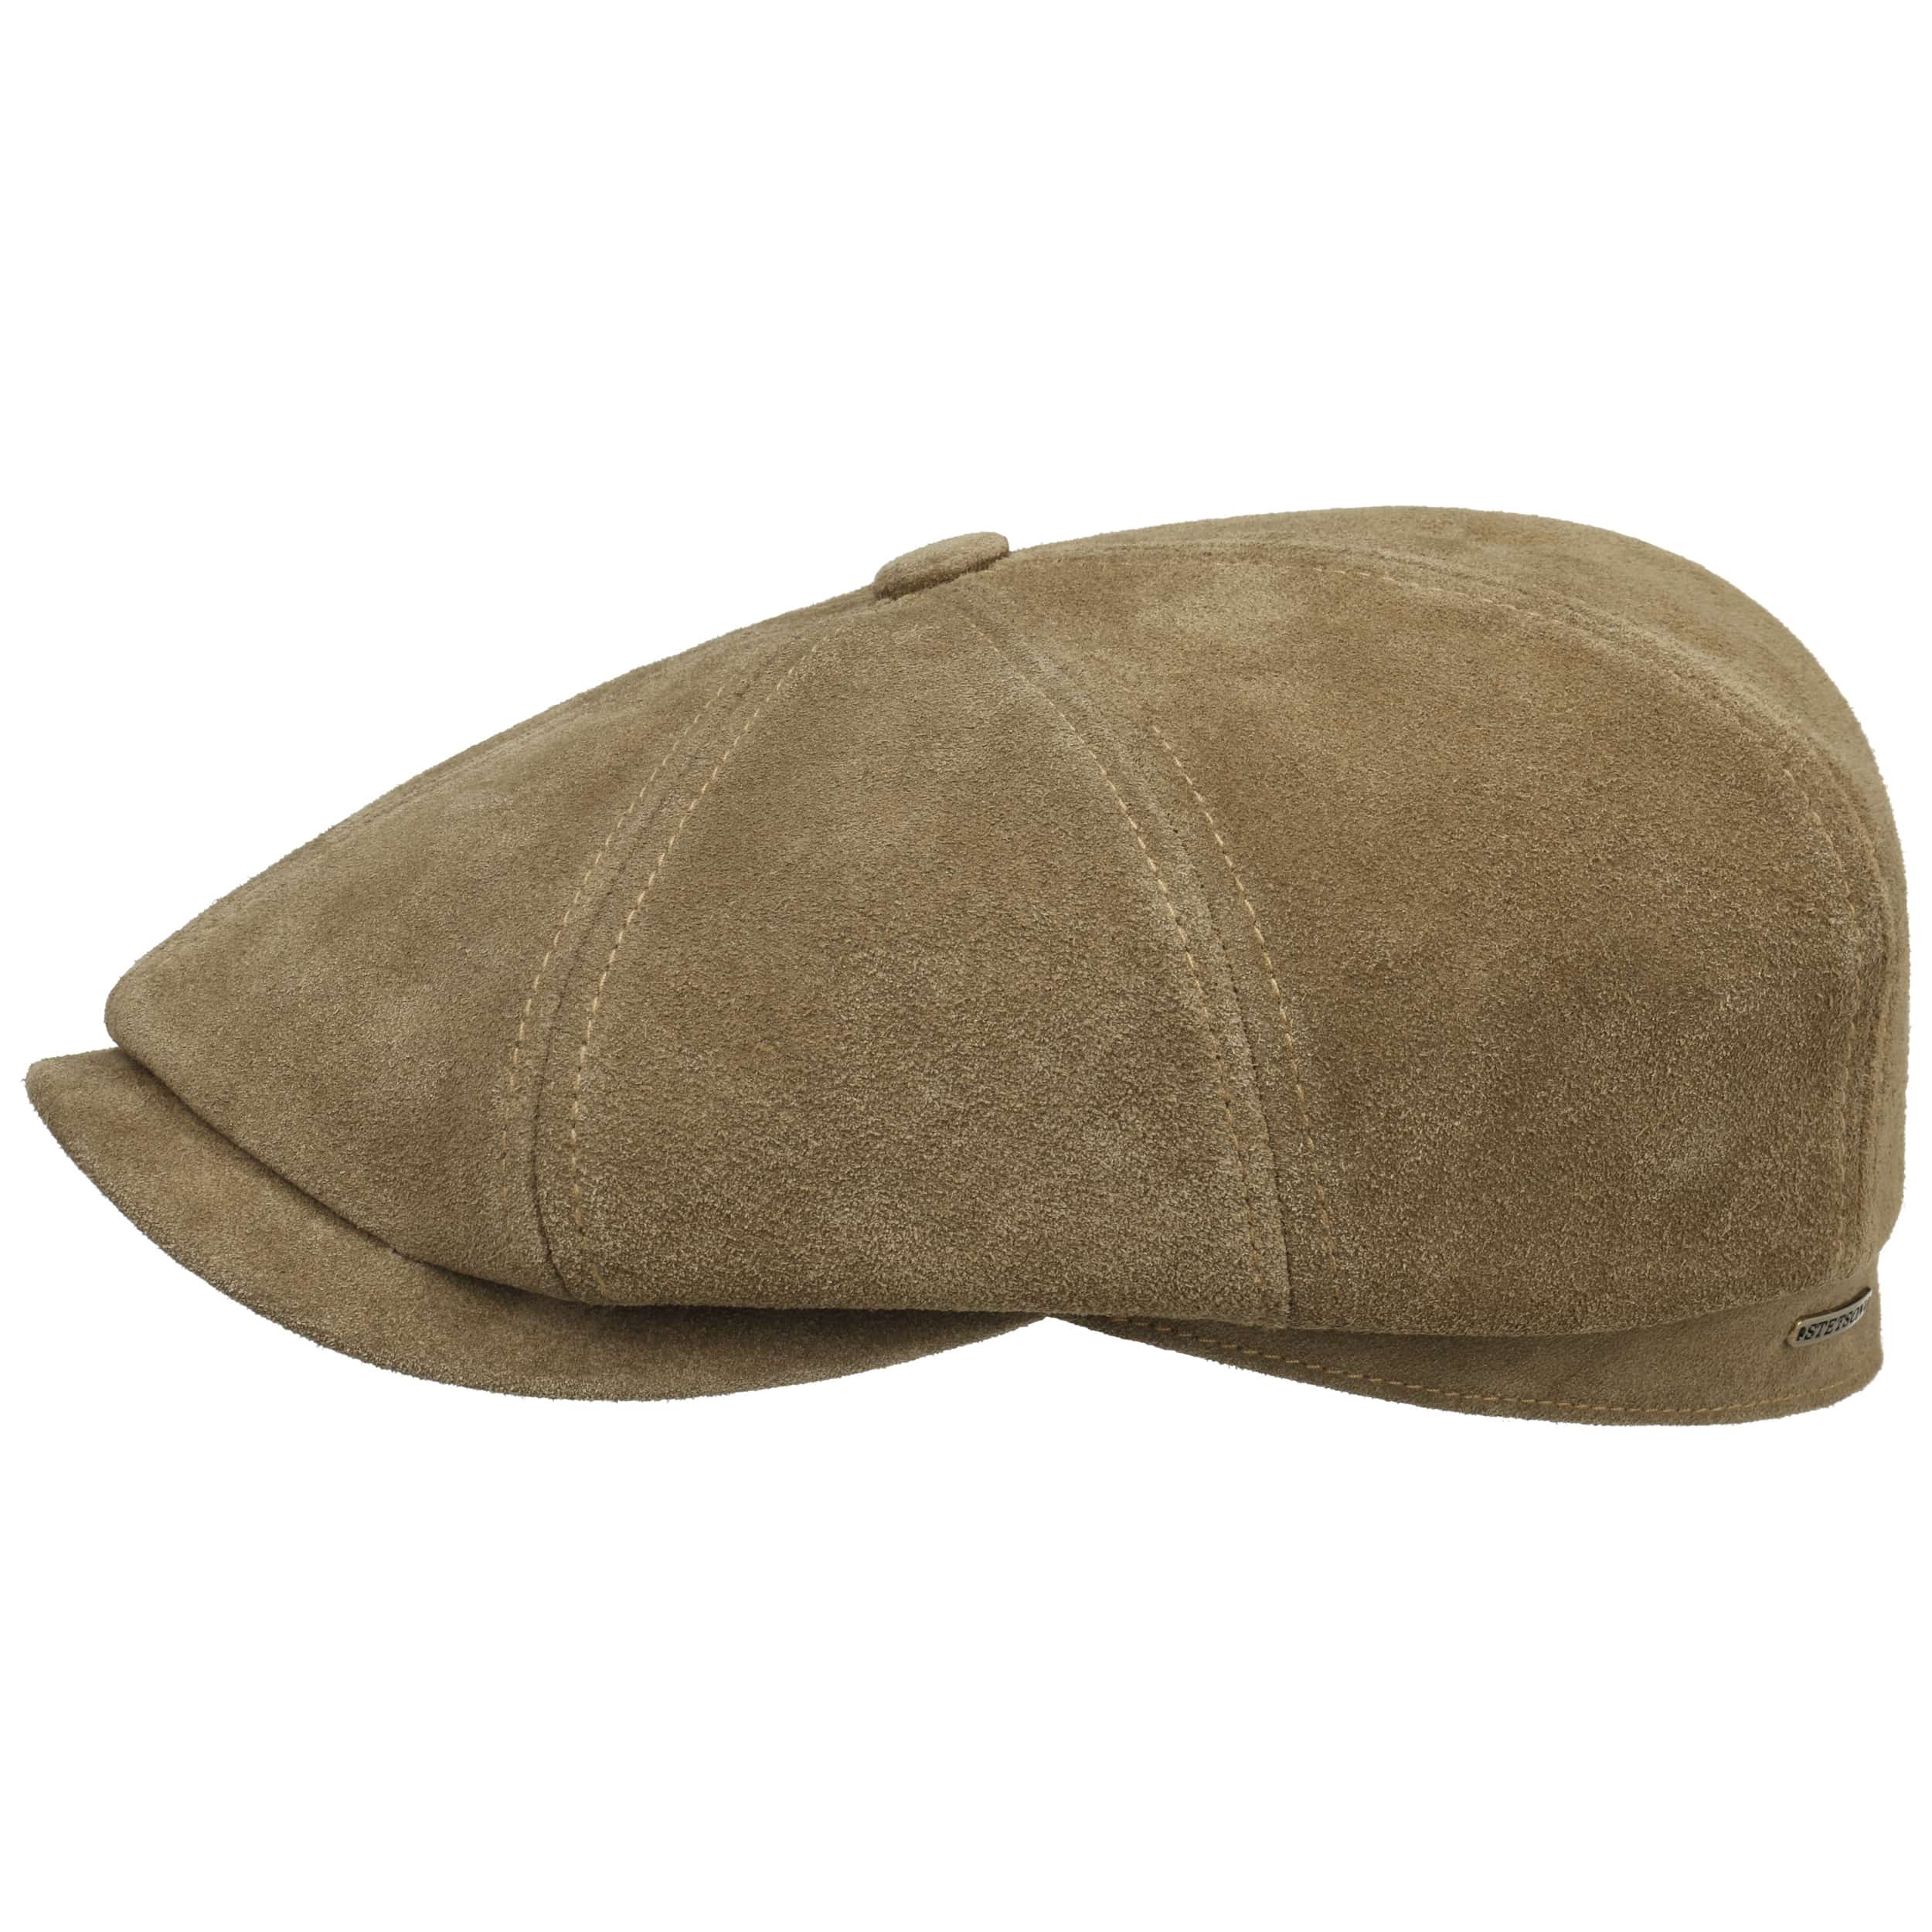 Hatteras Calf Leather Flat Cap by Stetson - 79,00